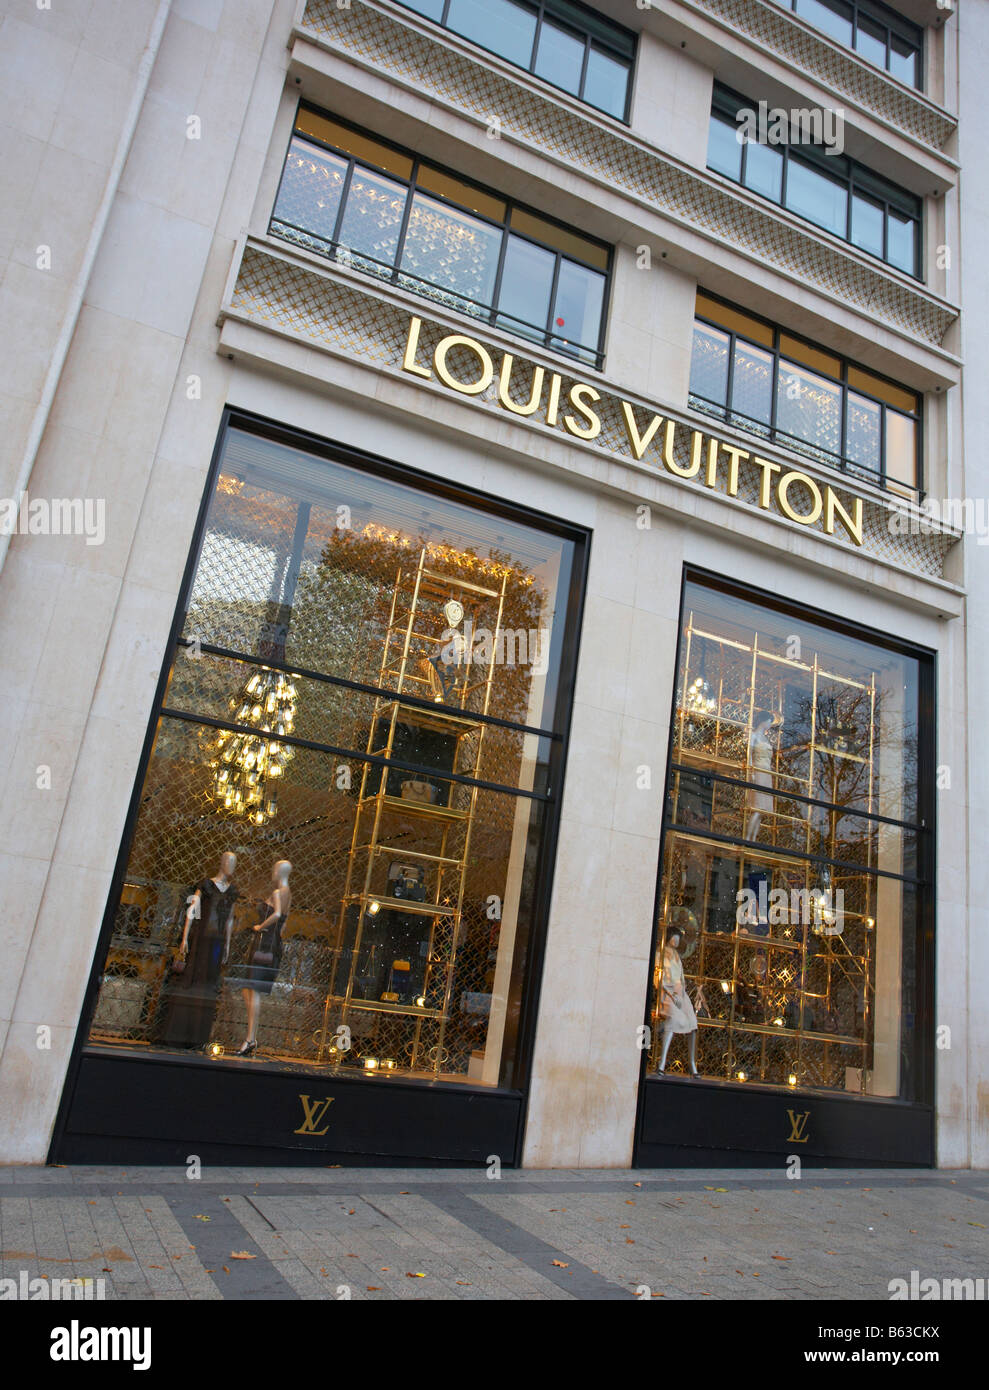 Louis Vuitton Fashion Luxury Store in Champs Elysees in Paris, France  Editorial Image - Image of brand, lifestyle: 148709115